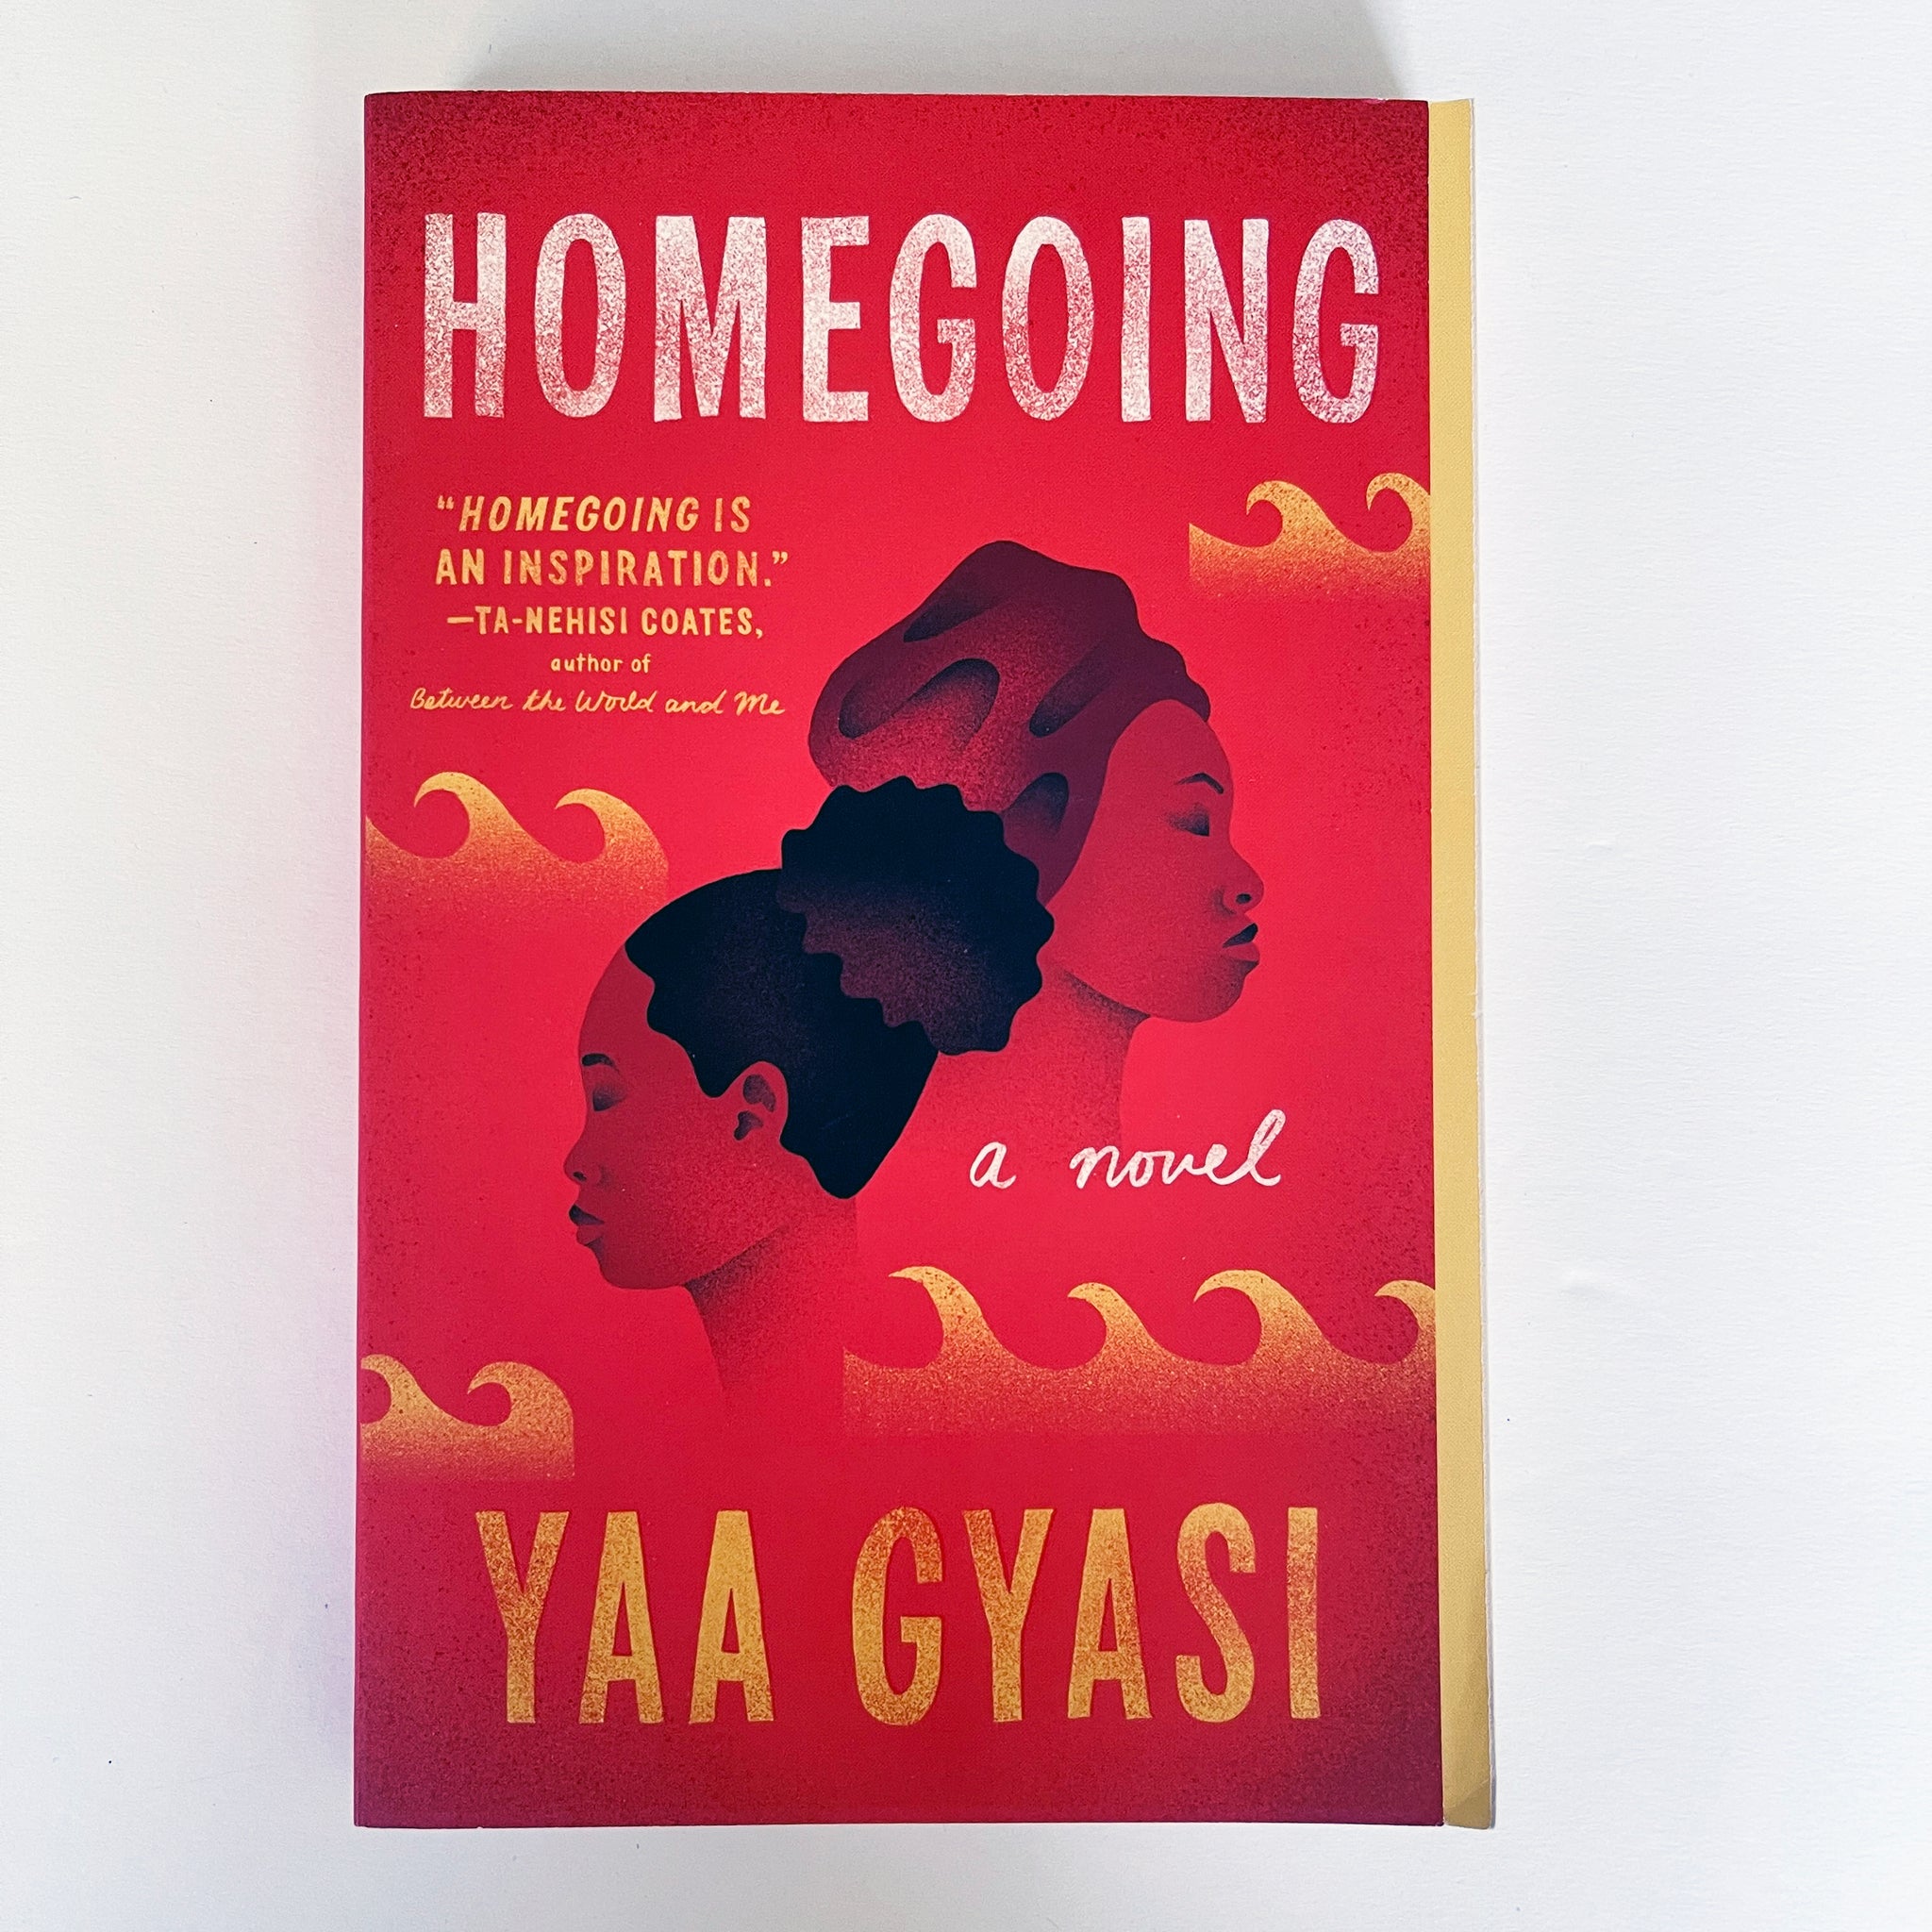 Homegoing is an inspiration - A Novel by Yaa Gyasi - Paperback